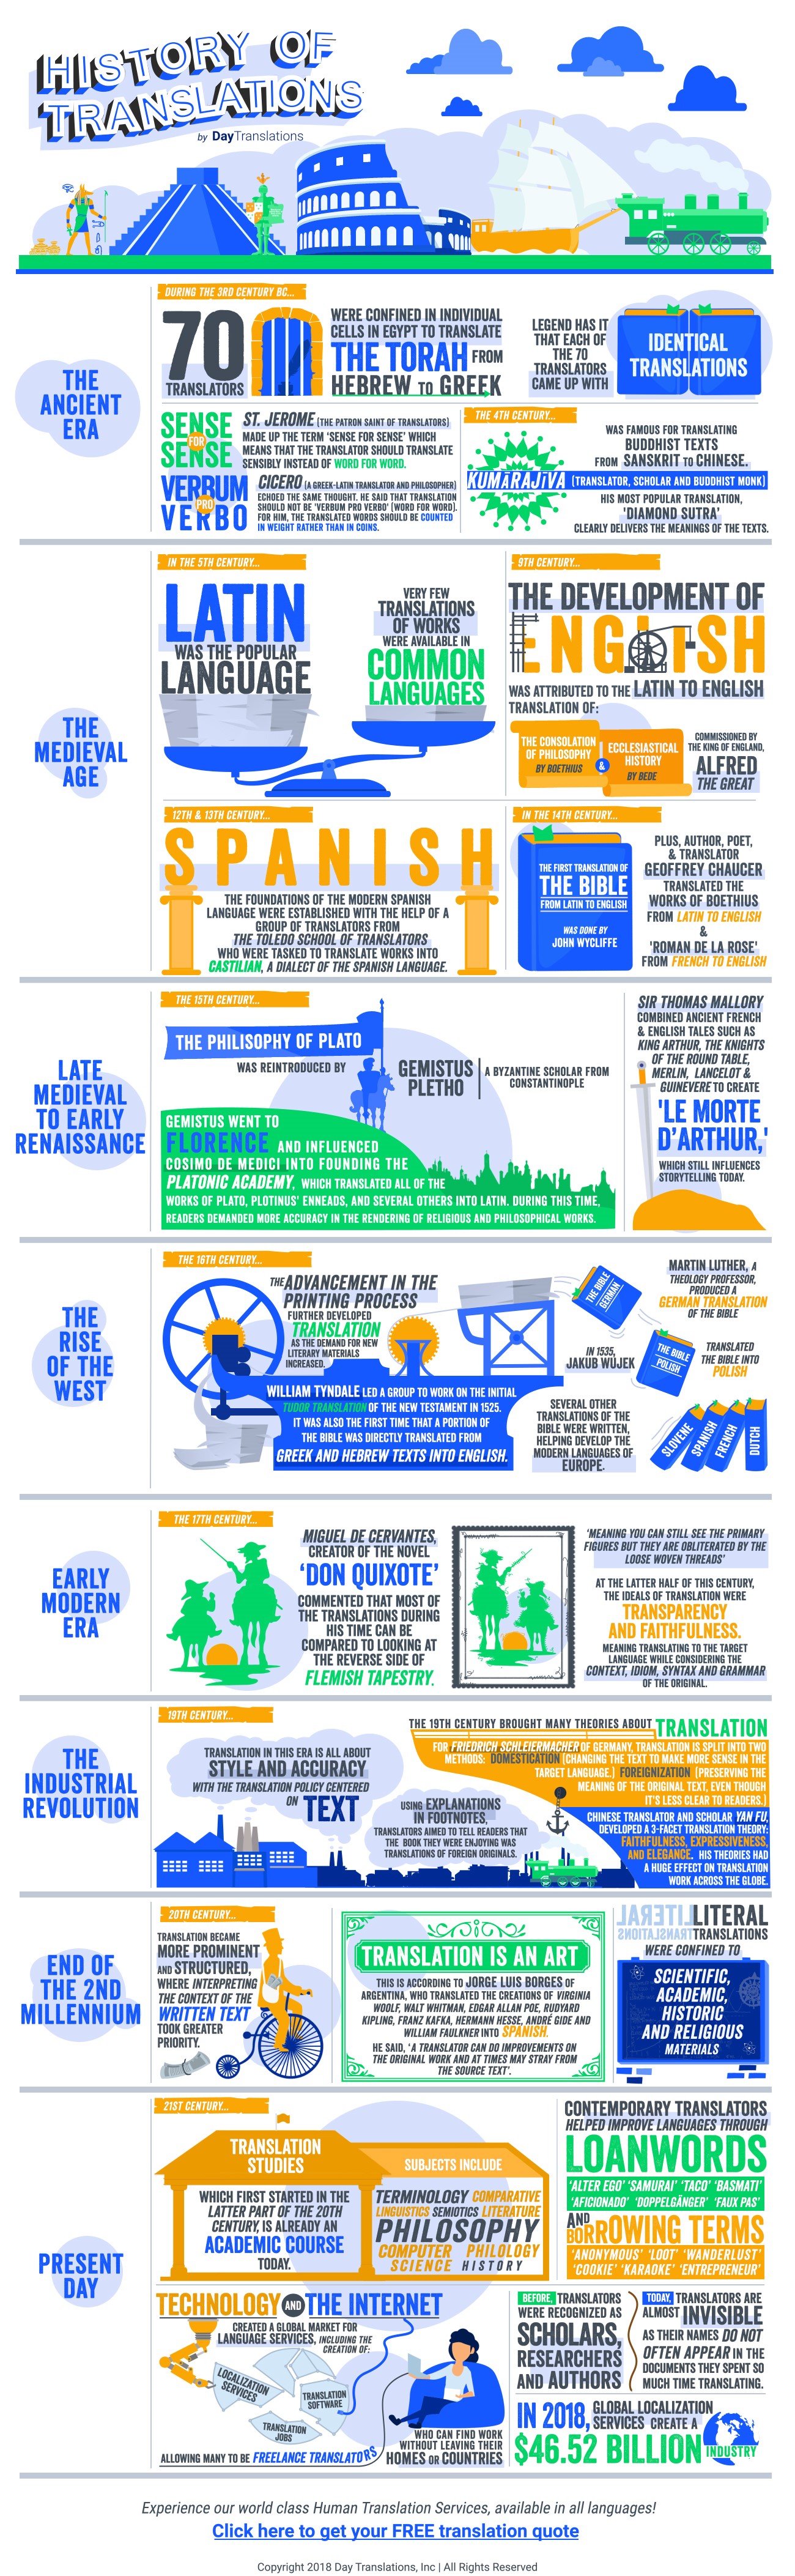 The Transformational History of Translations - Infographic